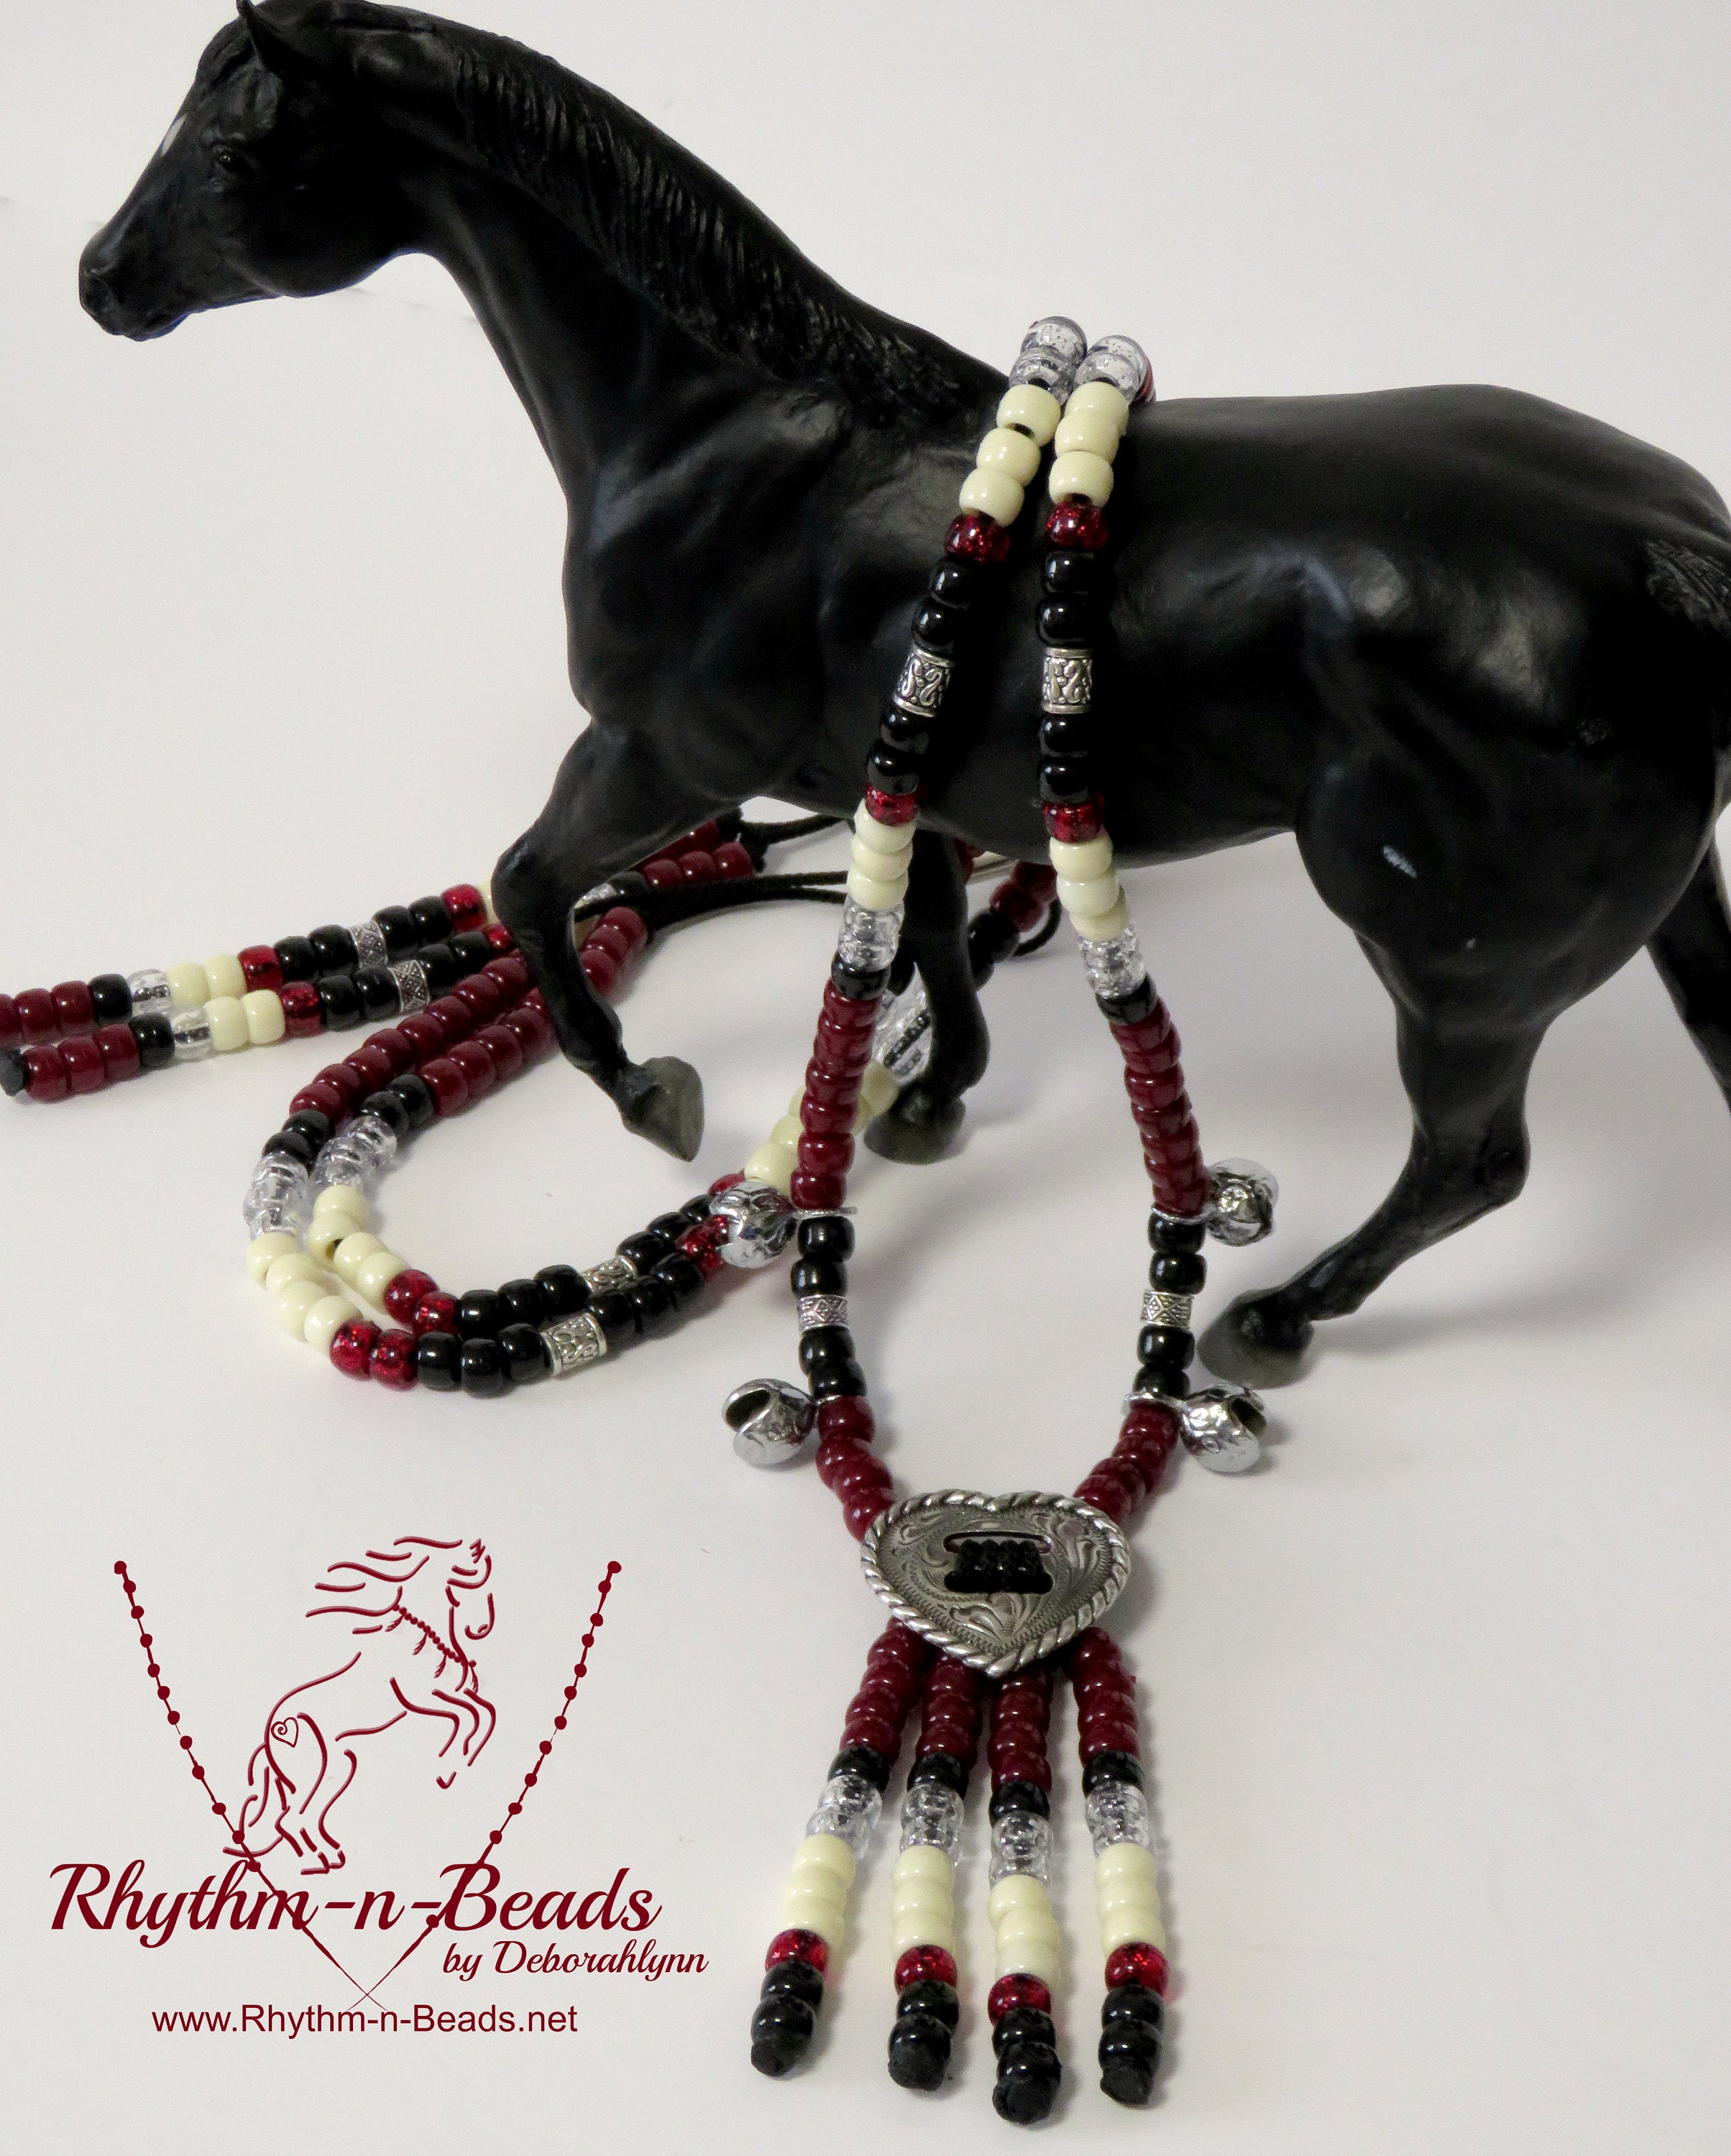 Rhythm Beads Necklace, QUEEN OF HEARTS, Trail Beads for Horses,Horse Show Tack, Horse Necklace, Speed Beads, Horse Lovers, Horse Bells